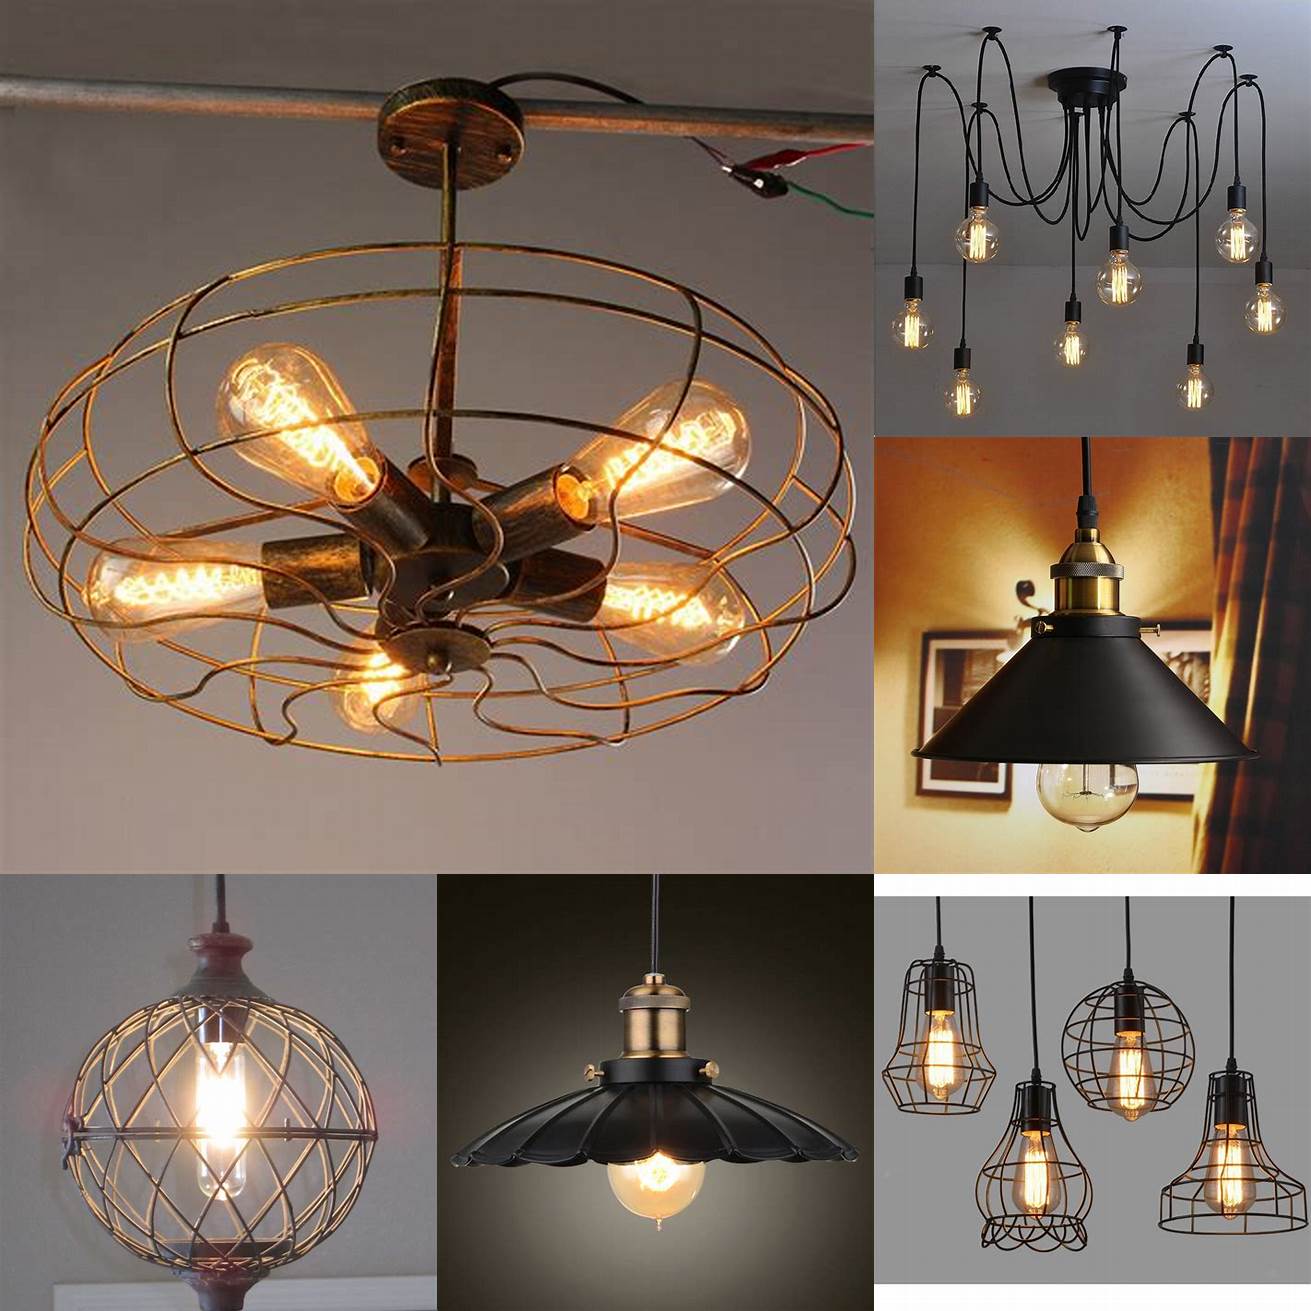 Vintage-inspired metal pendant lights with exposed bulbs